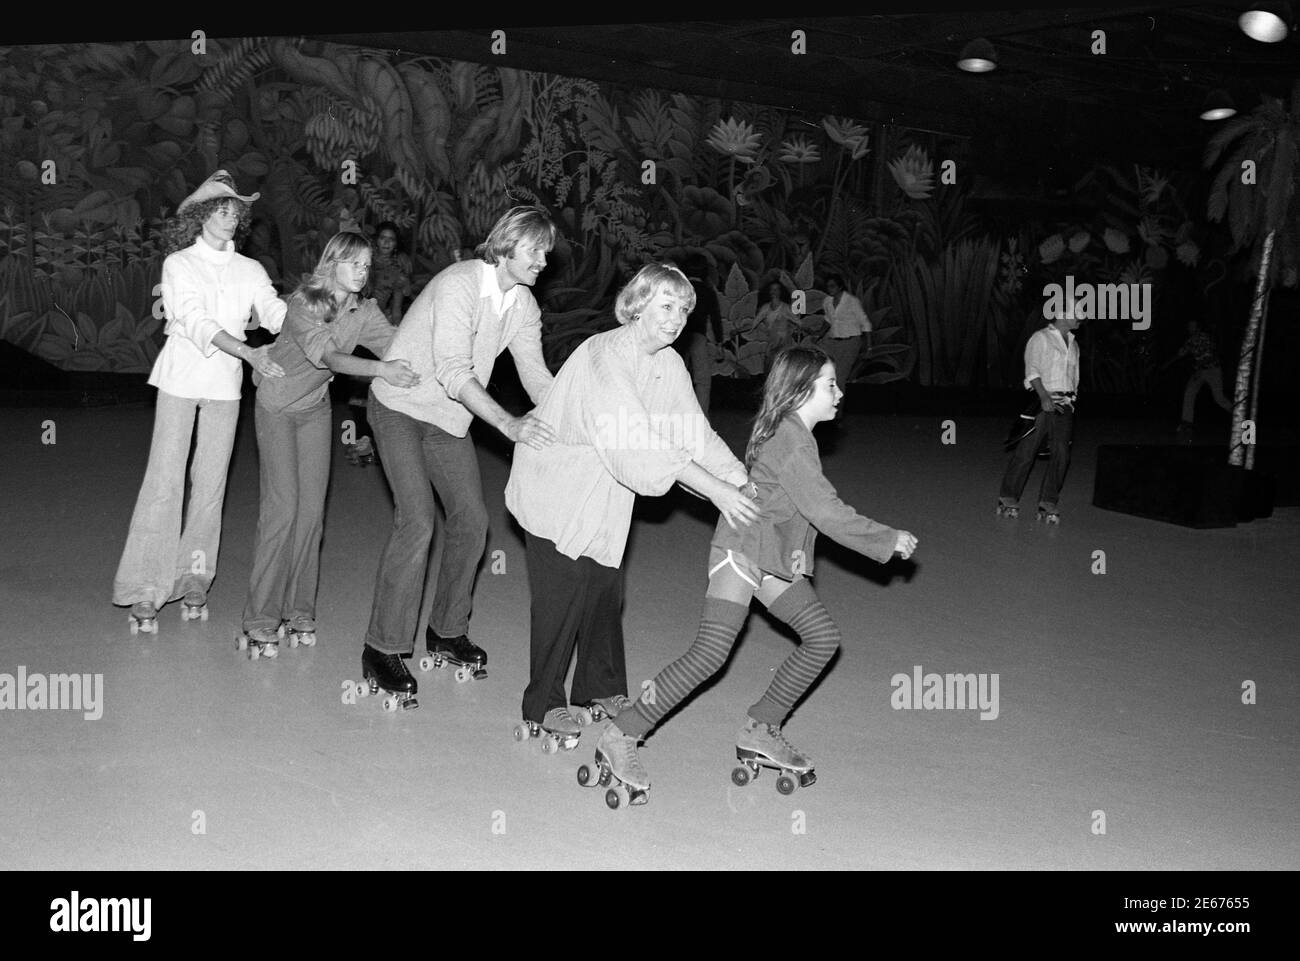 Jon Voigt at Flippers Roller Rink  for event in support of ERA, Los Angeles, OCt. 29, 1978 Stock Photo